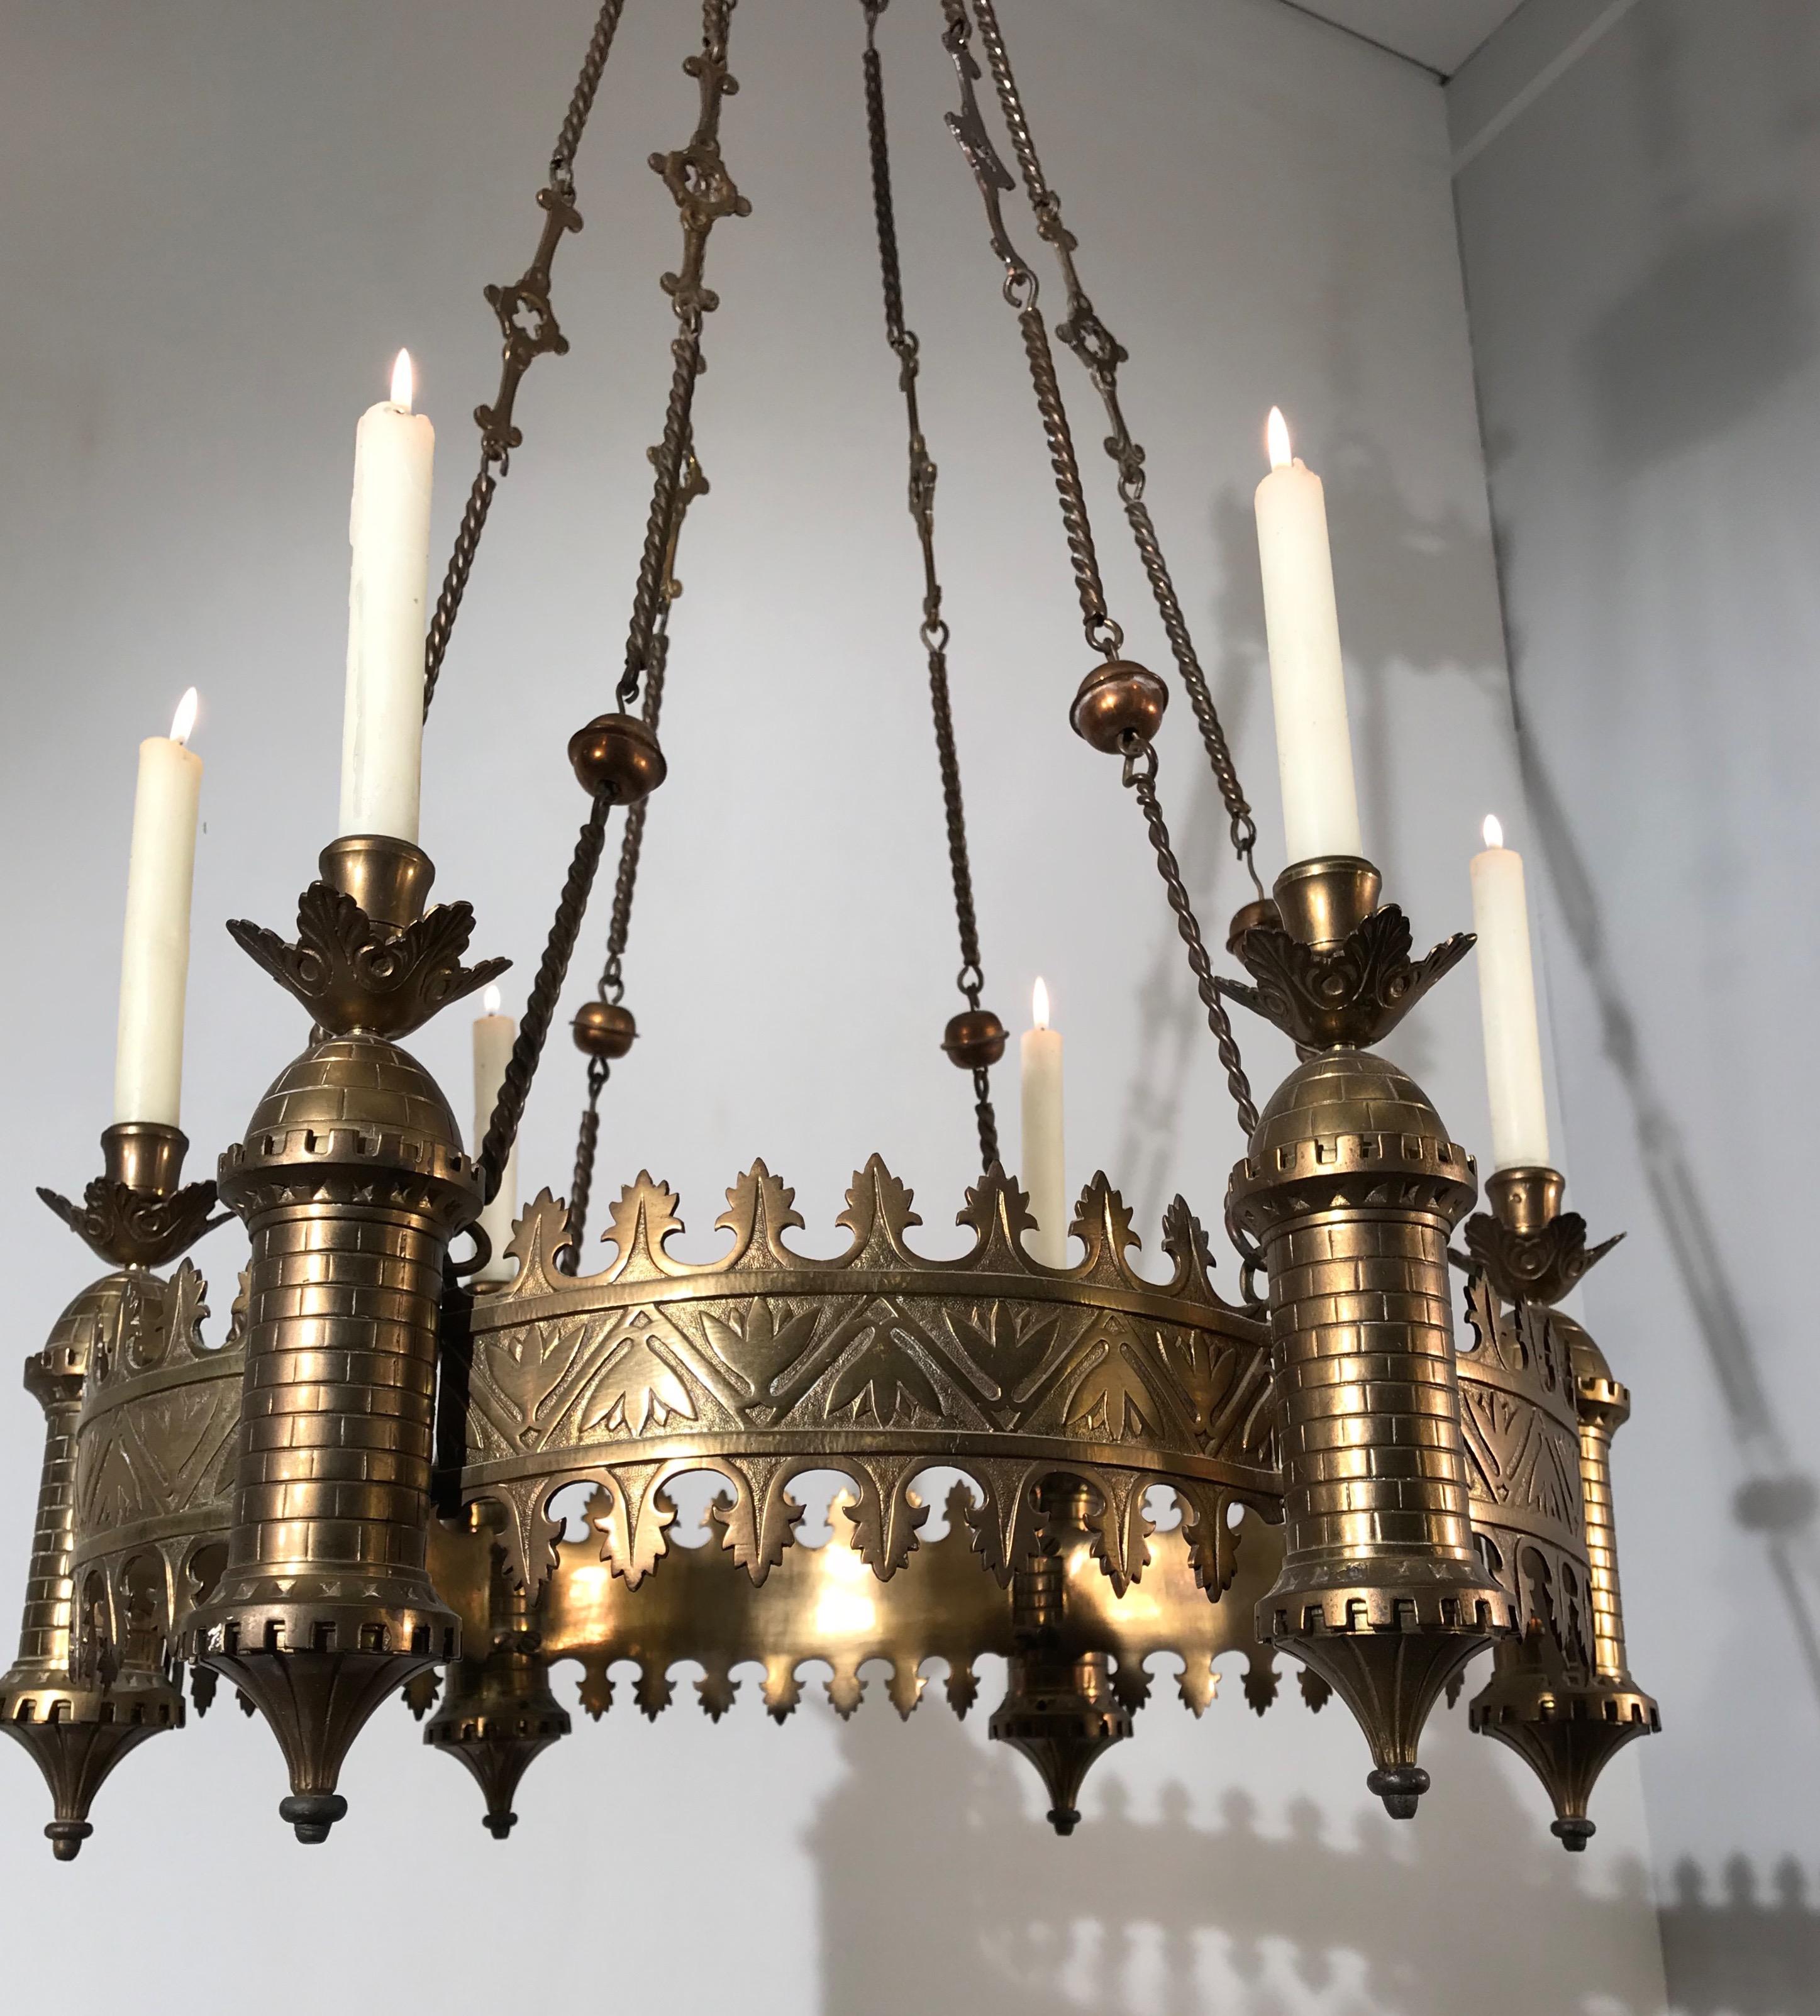 French Antique Bronze and Brass Castle Tower Design Gothic Revival Candle Chandelier